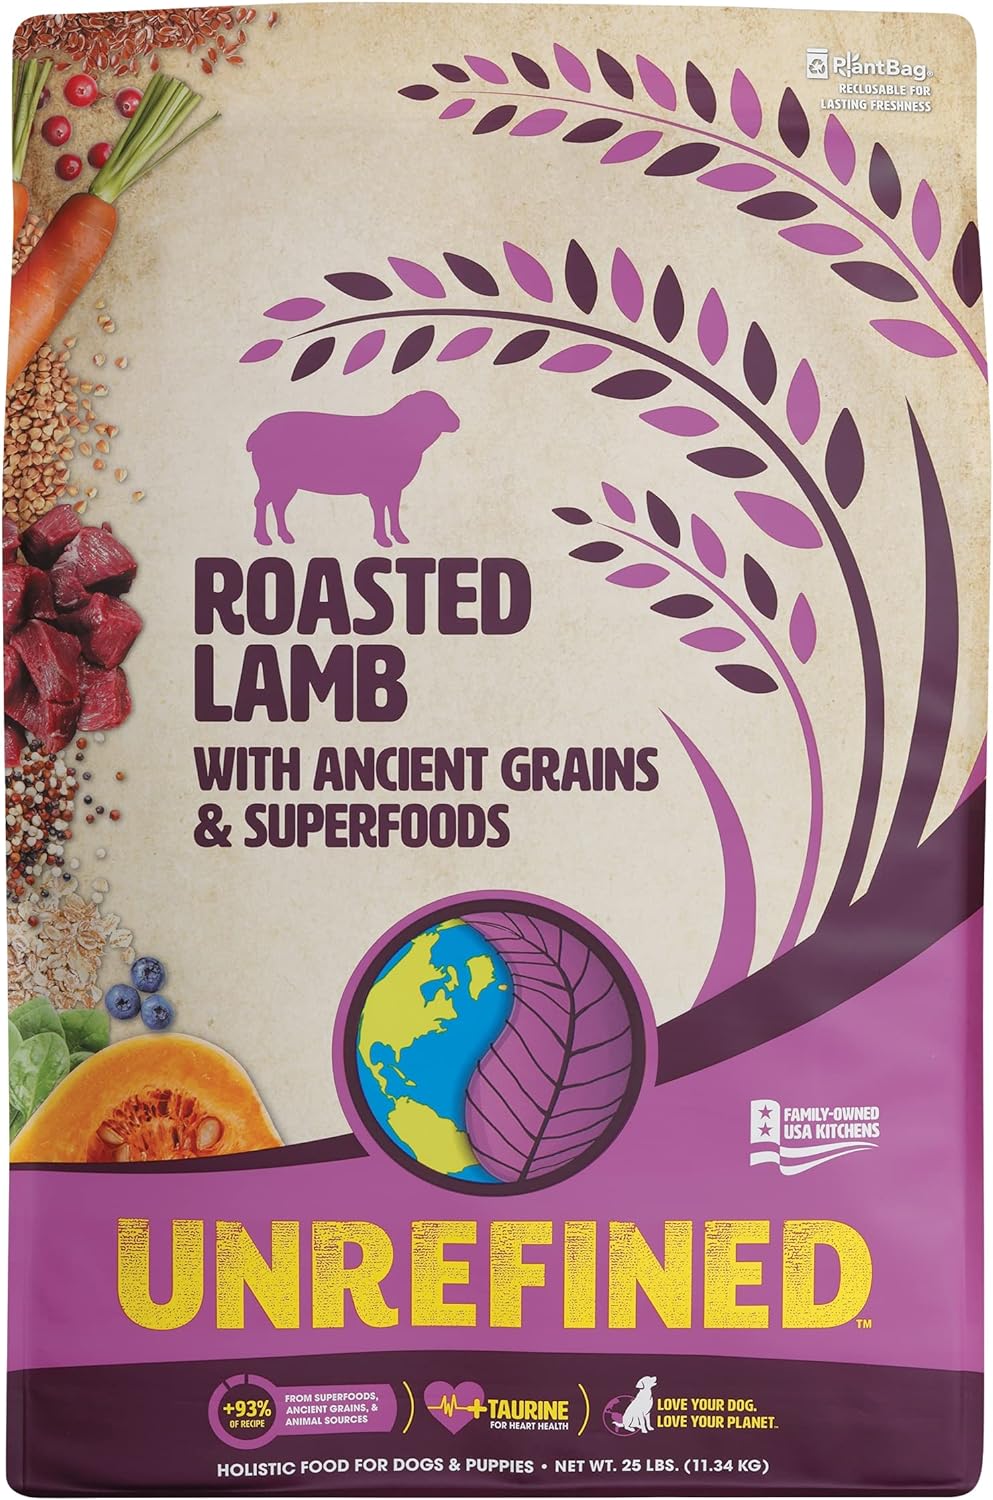 Earthborn Holistic Unrefined Roasted Lamb with Ancient Grains & Superfoods Dry Dog Food – Gallery Image 1